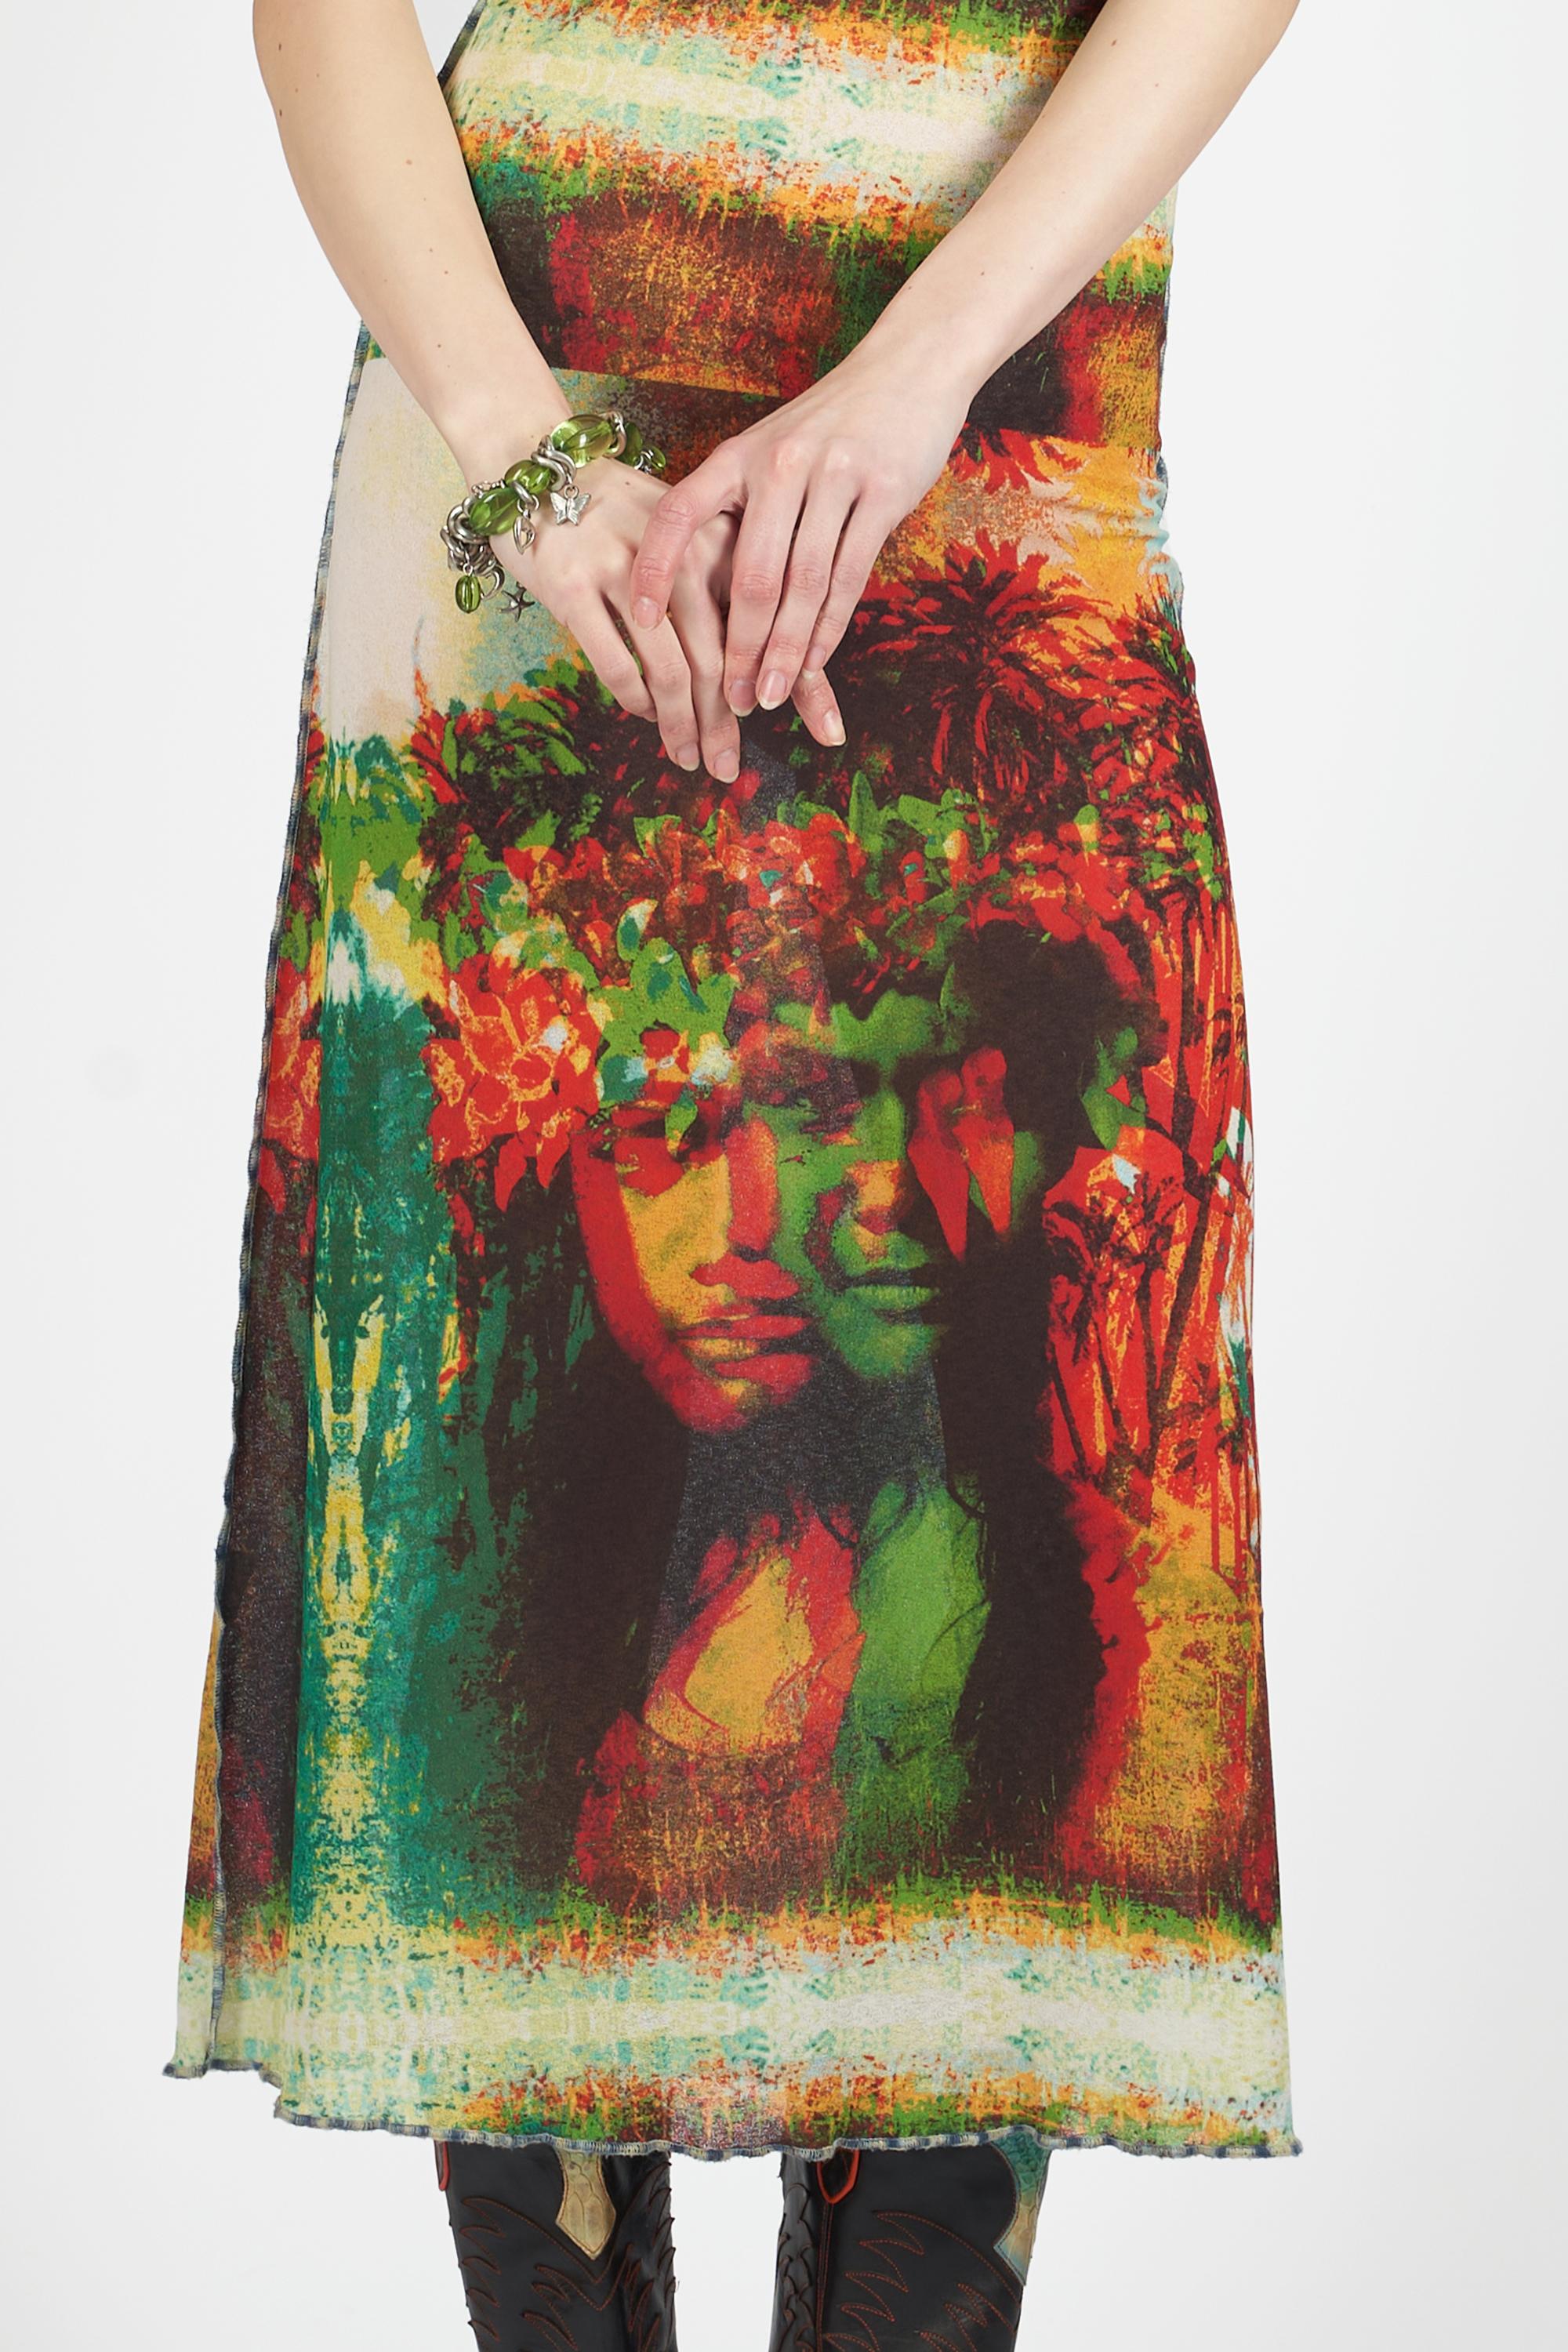 Jean Paul Gaultier Vintage S/S 2000 Runway Psychedelic Faces Mesh Dress In Excellent Condition In London, GB